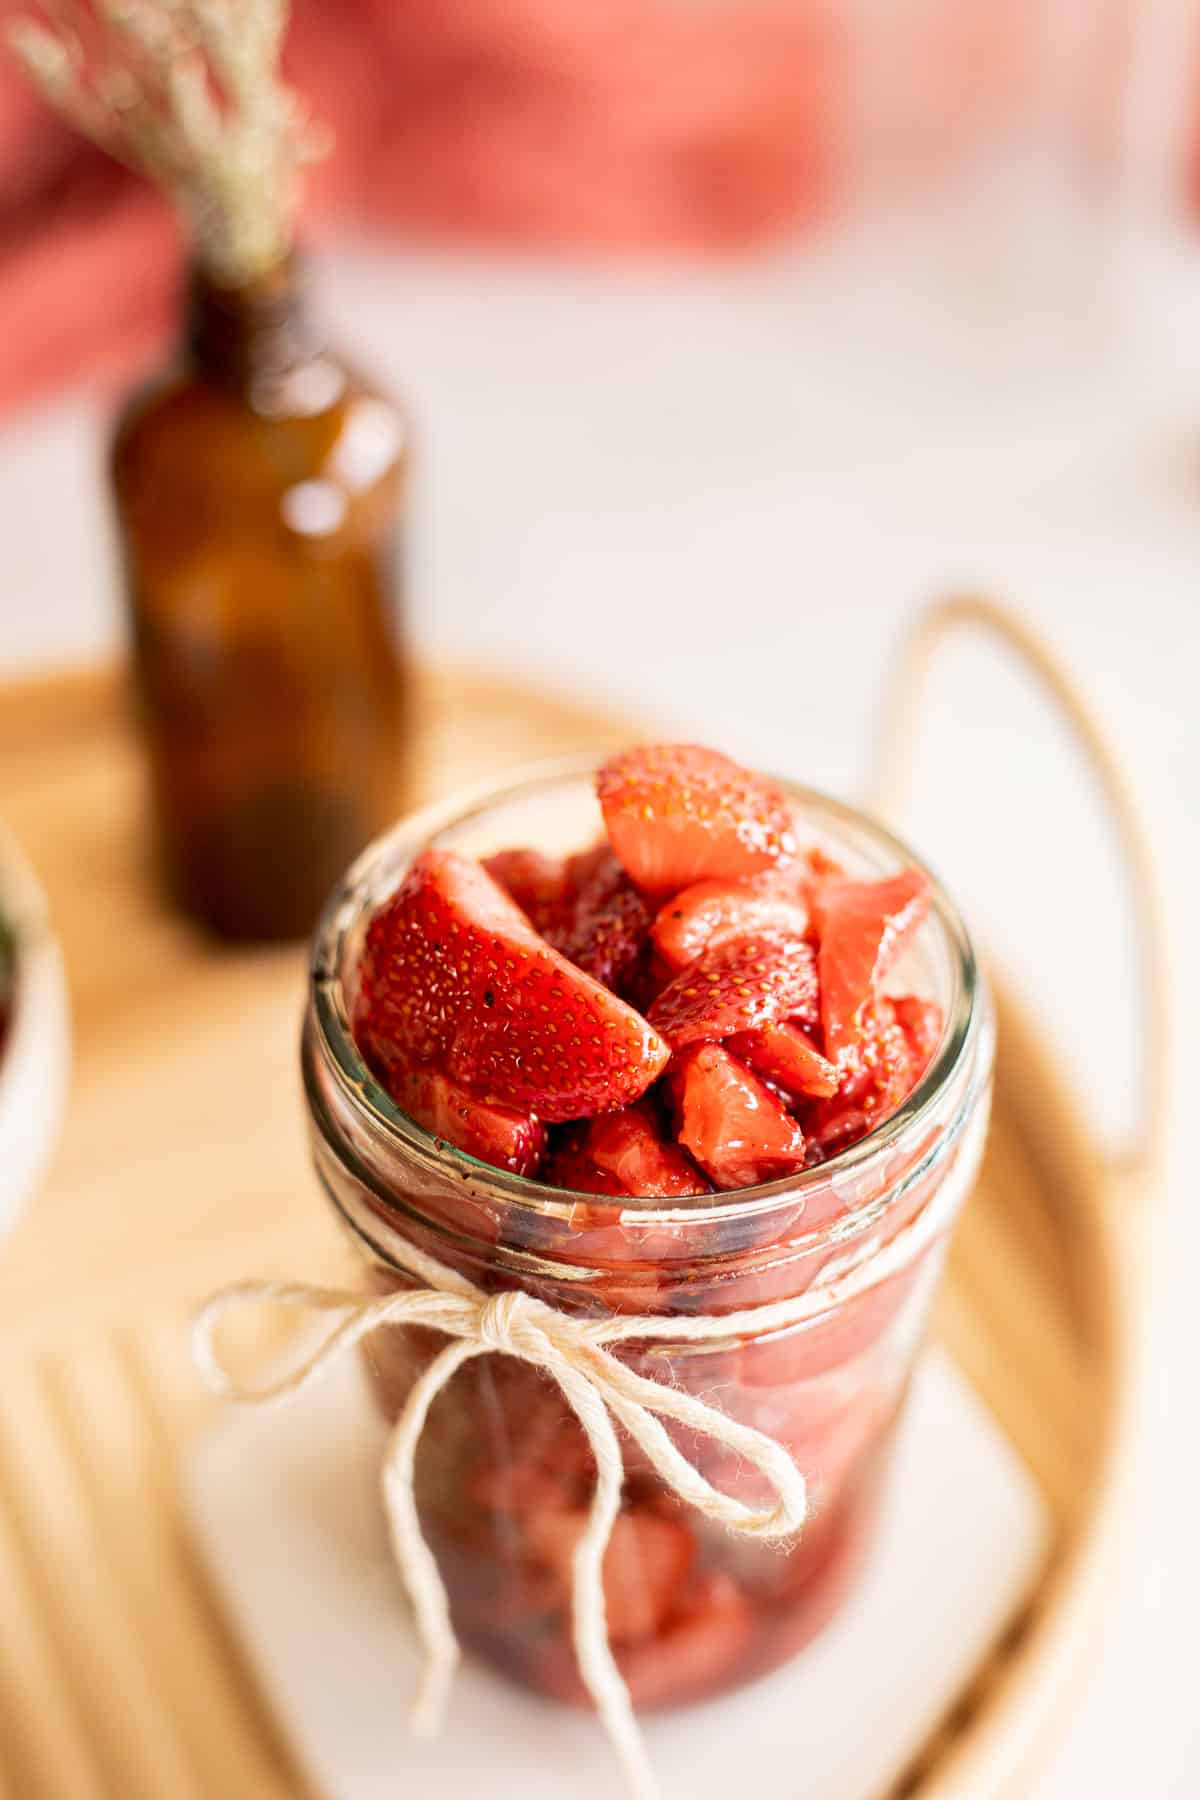 homemade strawberry compote in a glass jar with a ribbon.